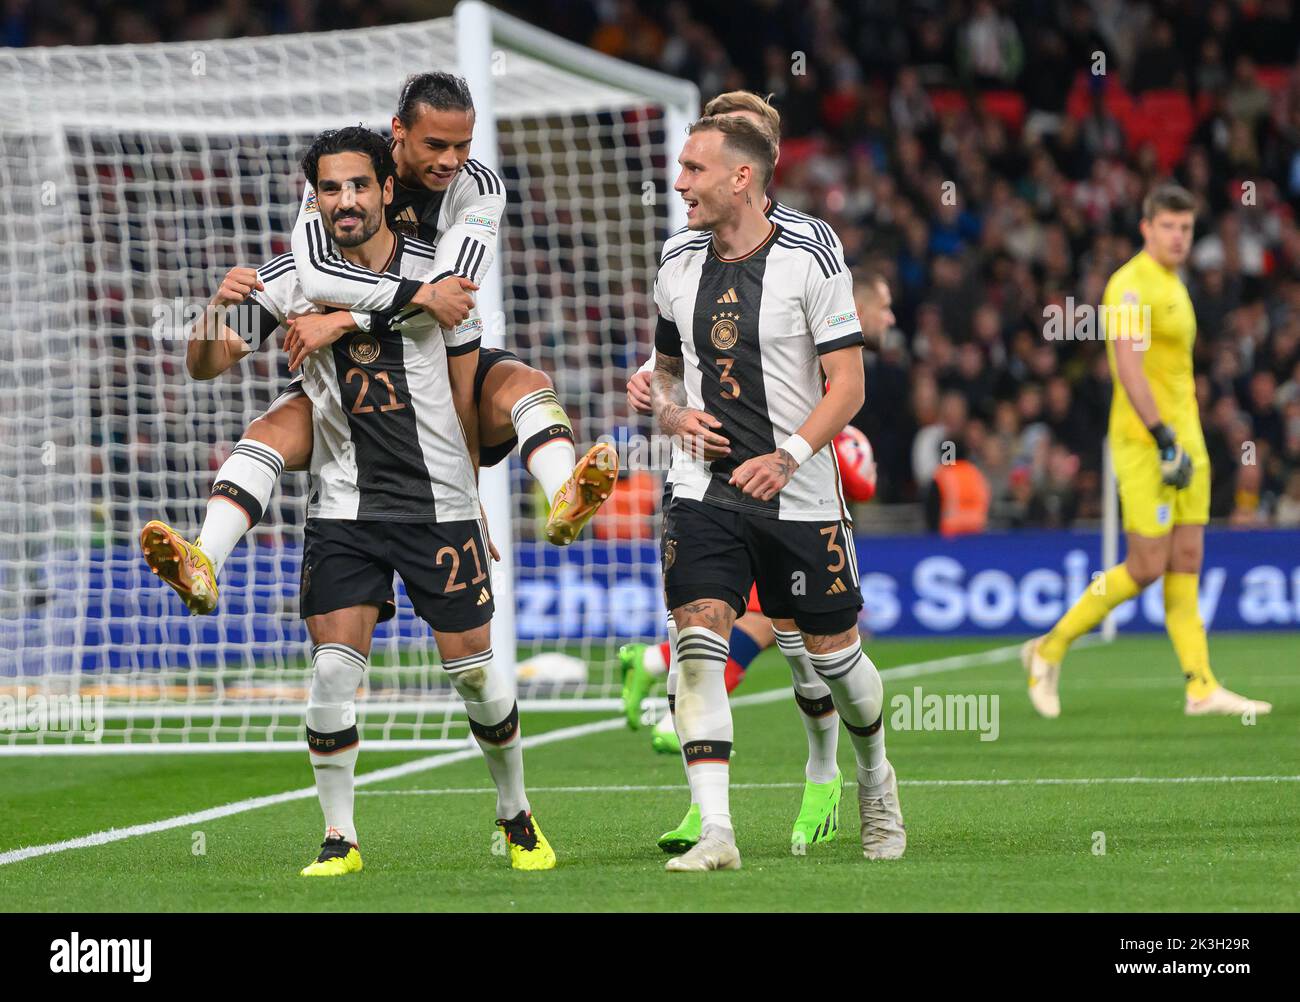 London, UK. 26 Sep 2022 - England v Germany - UEFA Nations League - League A - Group 3 - Wembley Stadium  Germany's Ilkay Gundogan celebrates scoring a penalty with David Raum and Leroy Sané during the UEFA Nations League match against England. Picture : Mark Pain / Alamy Live News Stock Photo